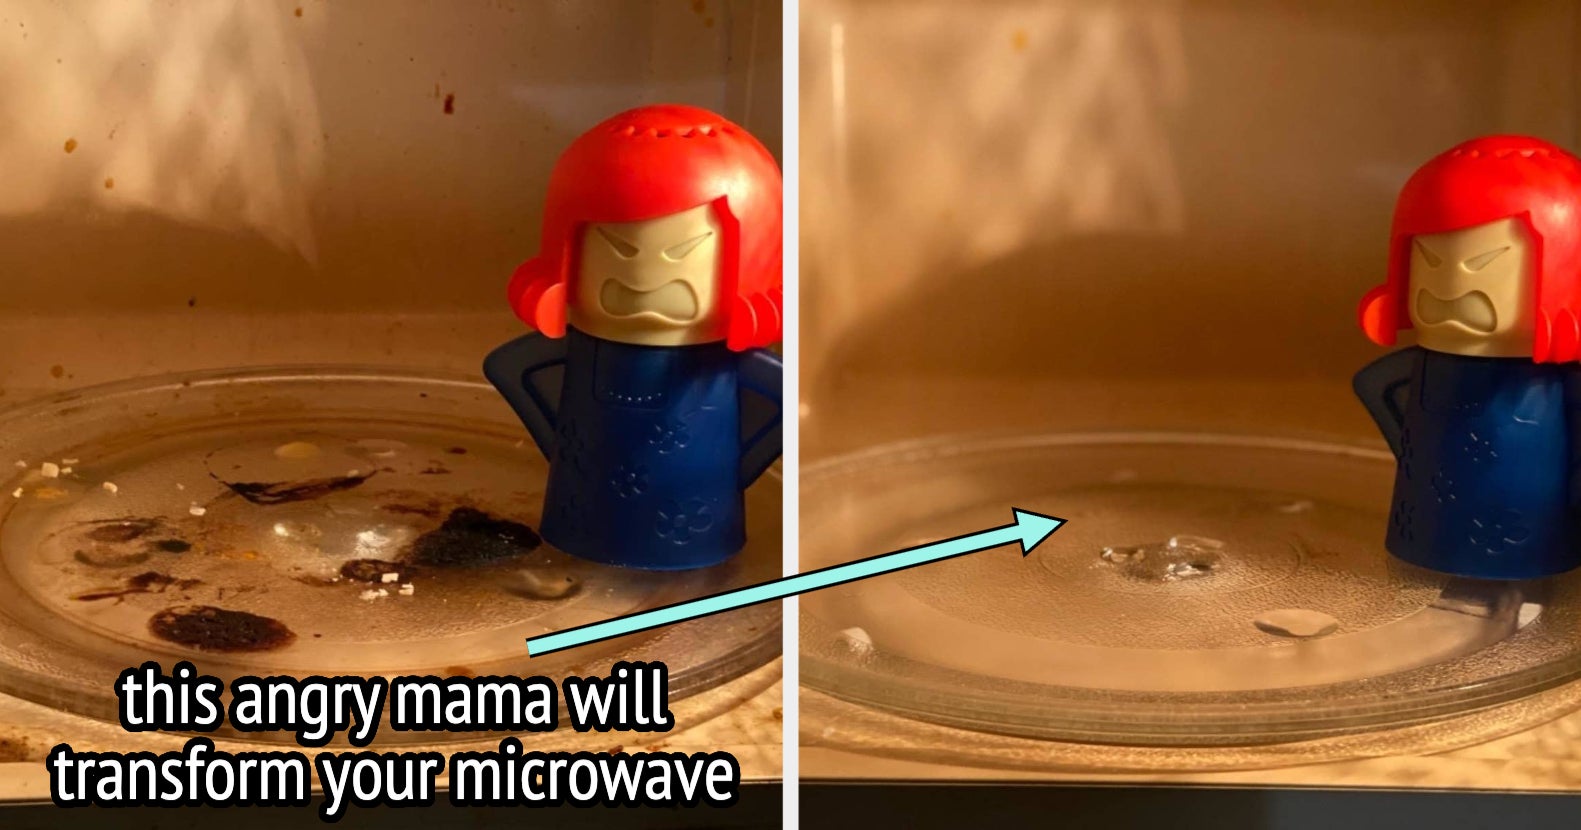 VONTER Angry Mama Microwave Cleaner Angry Mom Microwave Oven Steam Cleaner  Easily Cleans The Crud in Minutes. Steam Cleans with Vinegar and Water for